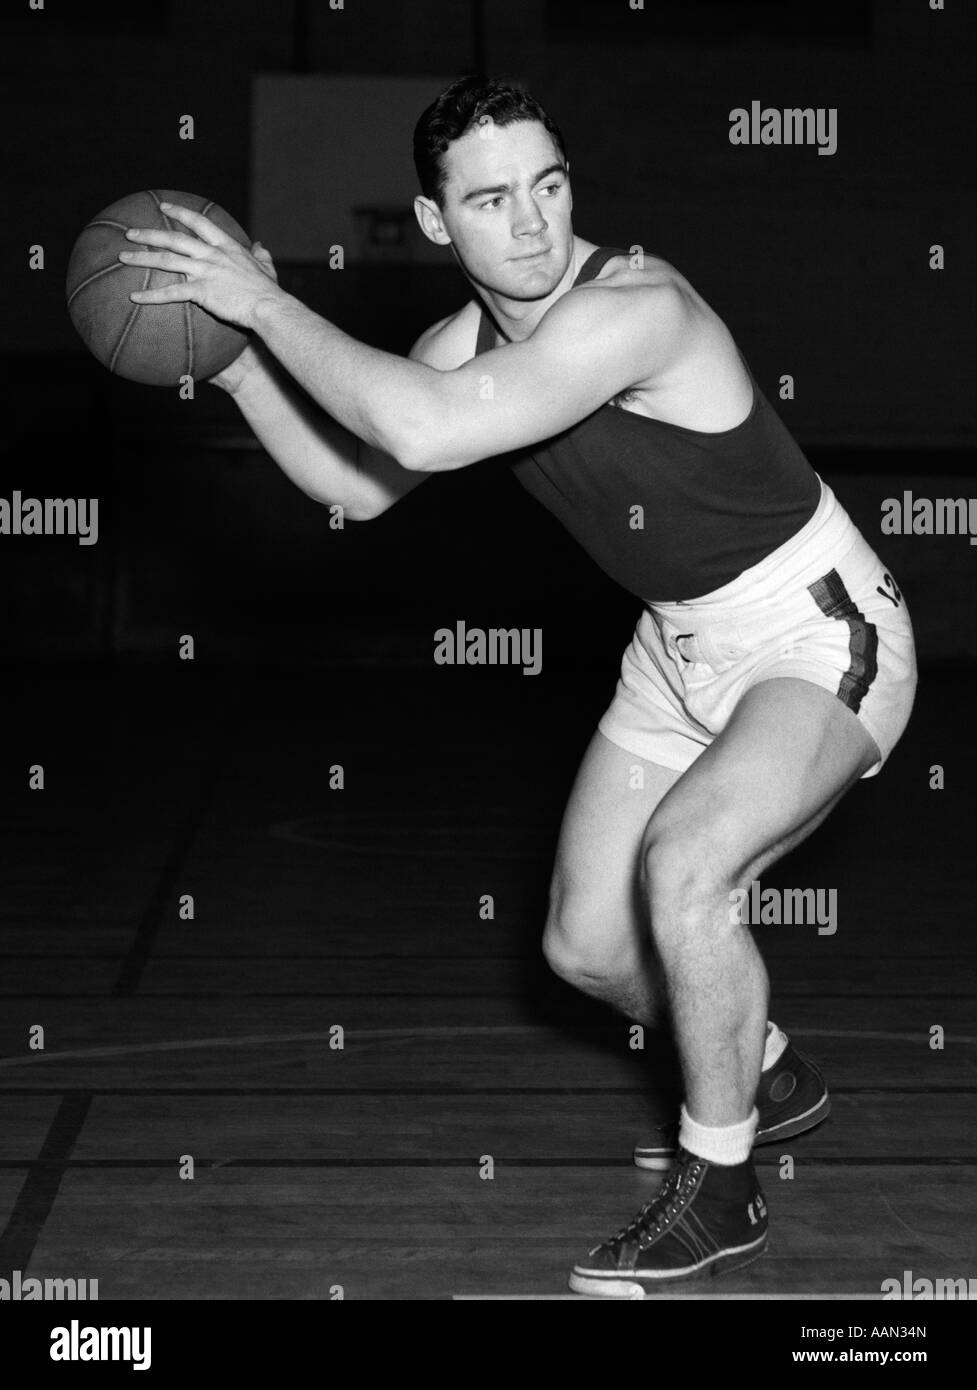 1930s TEEN BOY PLAYING BASKETBALL HOLDING BALL STANDING IN POSITION Stock Photo